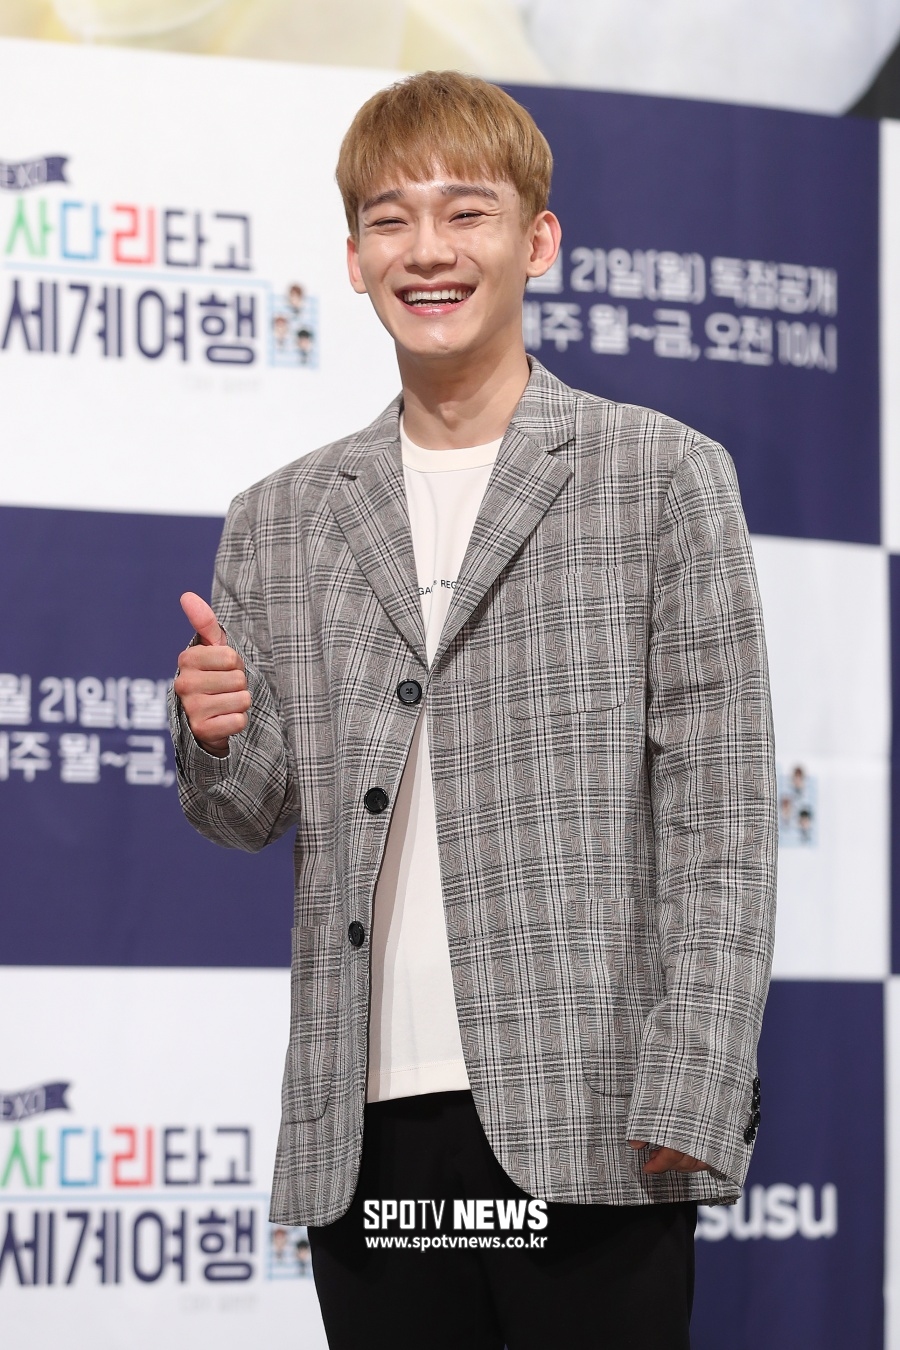 One Week has passed since EXO Chens marriage and the news of the second generation, but there is still a gap between the fandom EXOel.Chen, who posted a letter to the fan community on the 13th and shared the news of marriage and his girlfriends pregnancy, said, I will always show you how to repay the love you have always done your best in your place without forgetting your gratitude.However, the news of the marriage and the second generation of the active top Idol members was a big shock not only to EXOs fandom EXOel but also to the public, and the public opinion surrounding Chen is still hot.Some fans are calling for Chens marriage and pregnancy to be removed from the team, saying they have caused a huge loss to the EXOs image.Chen has labeled EXO marriage stone and Yubudol, and rumors are constant for other members.From 1 pm to 6 pm on the 19th, Chens Withdrawal demonstration was held in front of COEX Atium in Samseong-dong, Seoul.Fans put on a banner saying There is no Chen in the future we draw and put on a silent demonstration with a picket called Chen Withdrawal in hand.On the other hand, fans who supported Chens choice, celebrating Chens marriage, also voiced a statement.It is their opinion that fandom demands Chens Withdrawal not to see him as a person but to highlight the wrong part of Idol culture that pursues and commercializes only images.As such, the opinions demanding Chens Withdrawal and the opinions supporting Chen are confronted with each other, and the division within the fandom is serious.Some people are asking for countermeasures and feedback from SM Entertainment, which is the only thing that can calm the situation.Currently, EXO members are showing active personal activities such as musicals, OSTs, and participation in fashion shows, while Chen and full EXO have not been revealed as specific activities.In Chens handwritten letter, I am very embarrassed because I can not do the parts I planned, the voices of fans asking SM and Chen for feedback are growing.It is noteworthy whether SM Entertainment and Chen will give feedback or if they can calm down the deepening fandom conflicts.